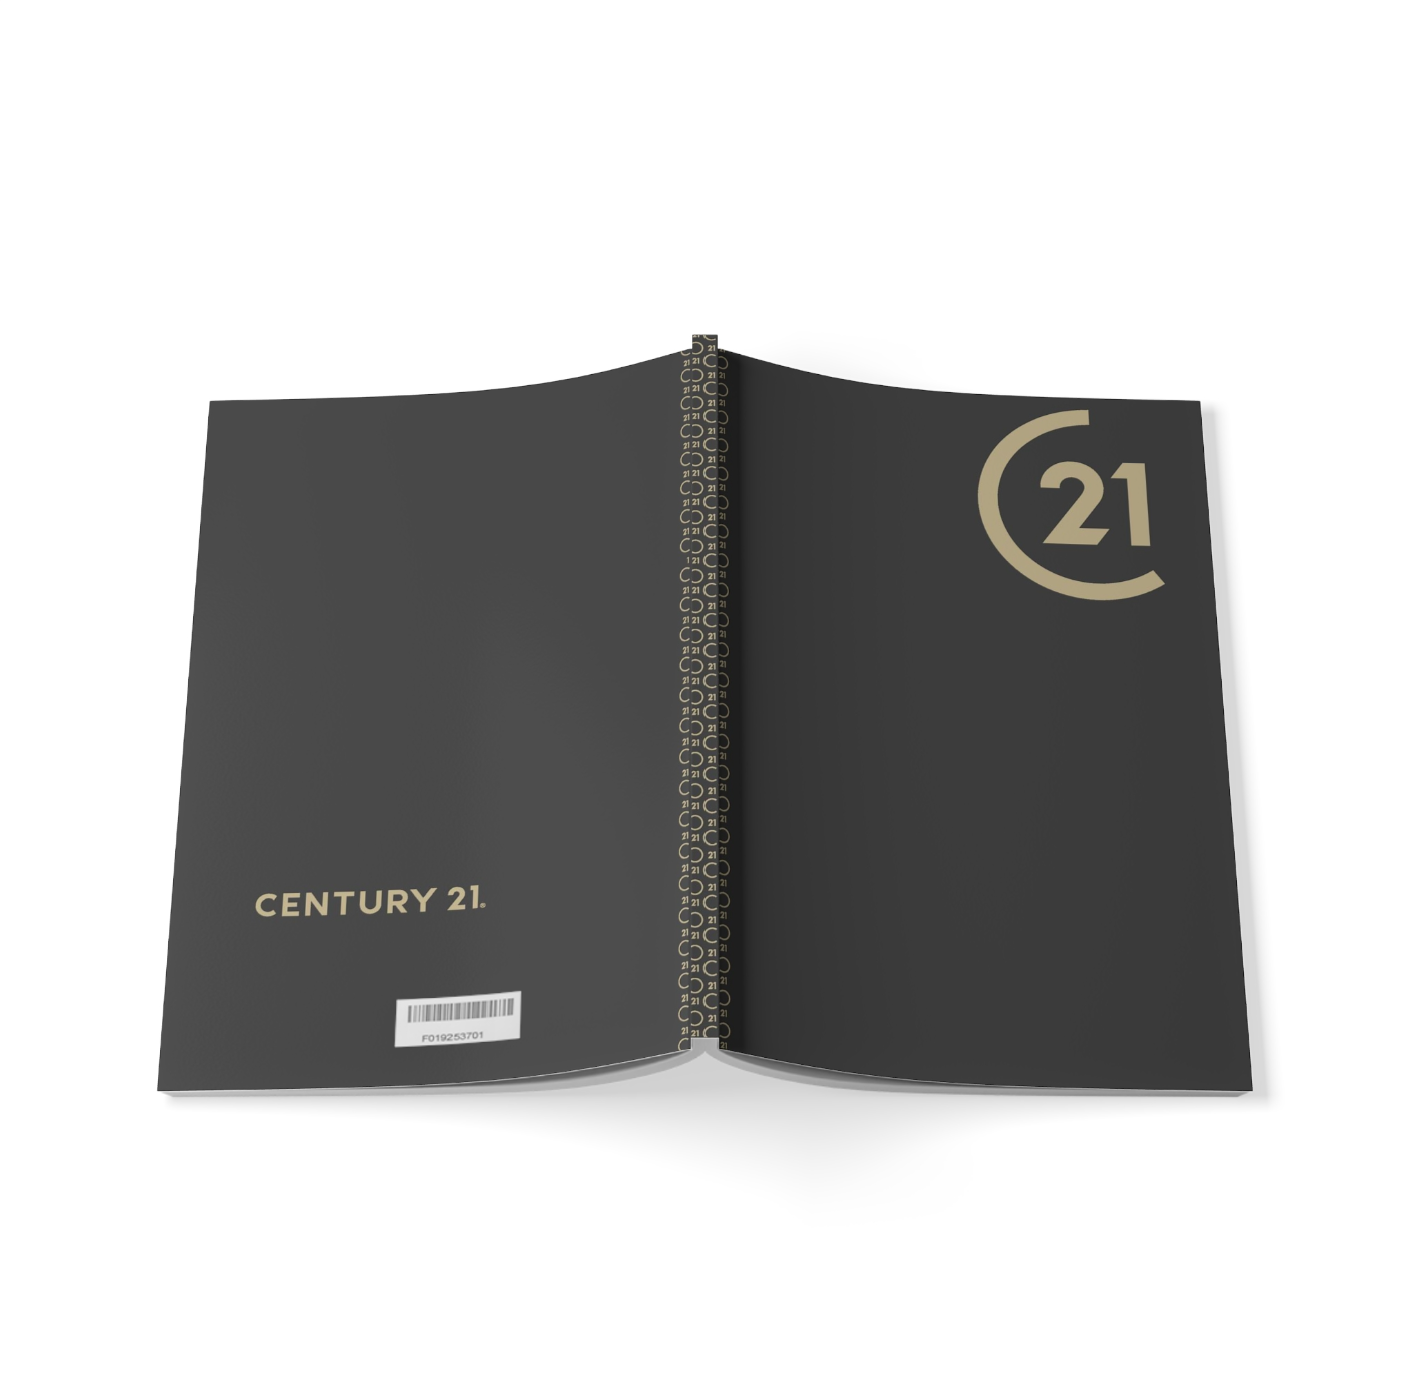 C21 Full Color SoftCover Binders Cedar (from as low as $6.18 per)